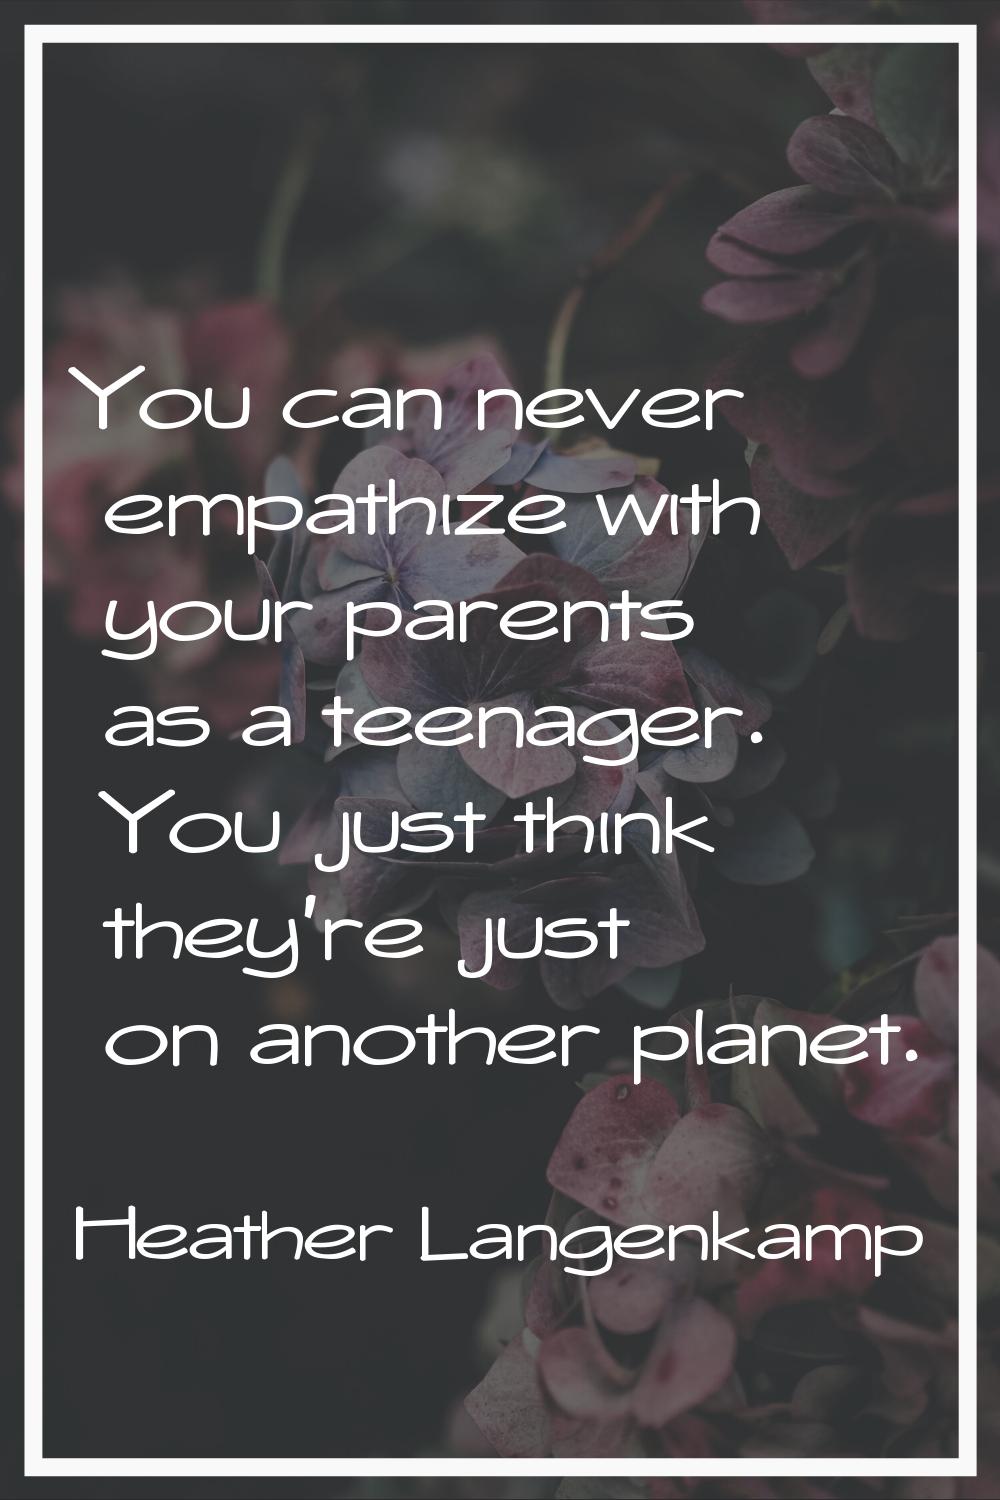 You can never empathize with your parents as a teenager. You just think they're just on another pla